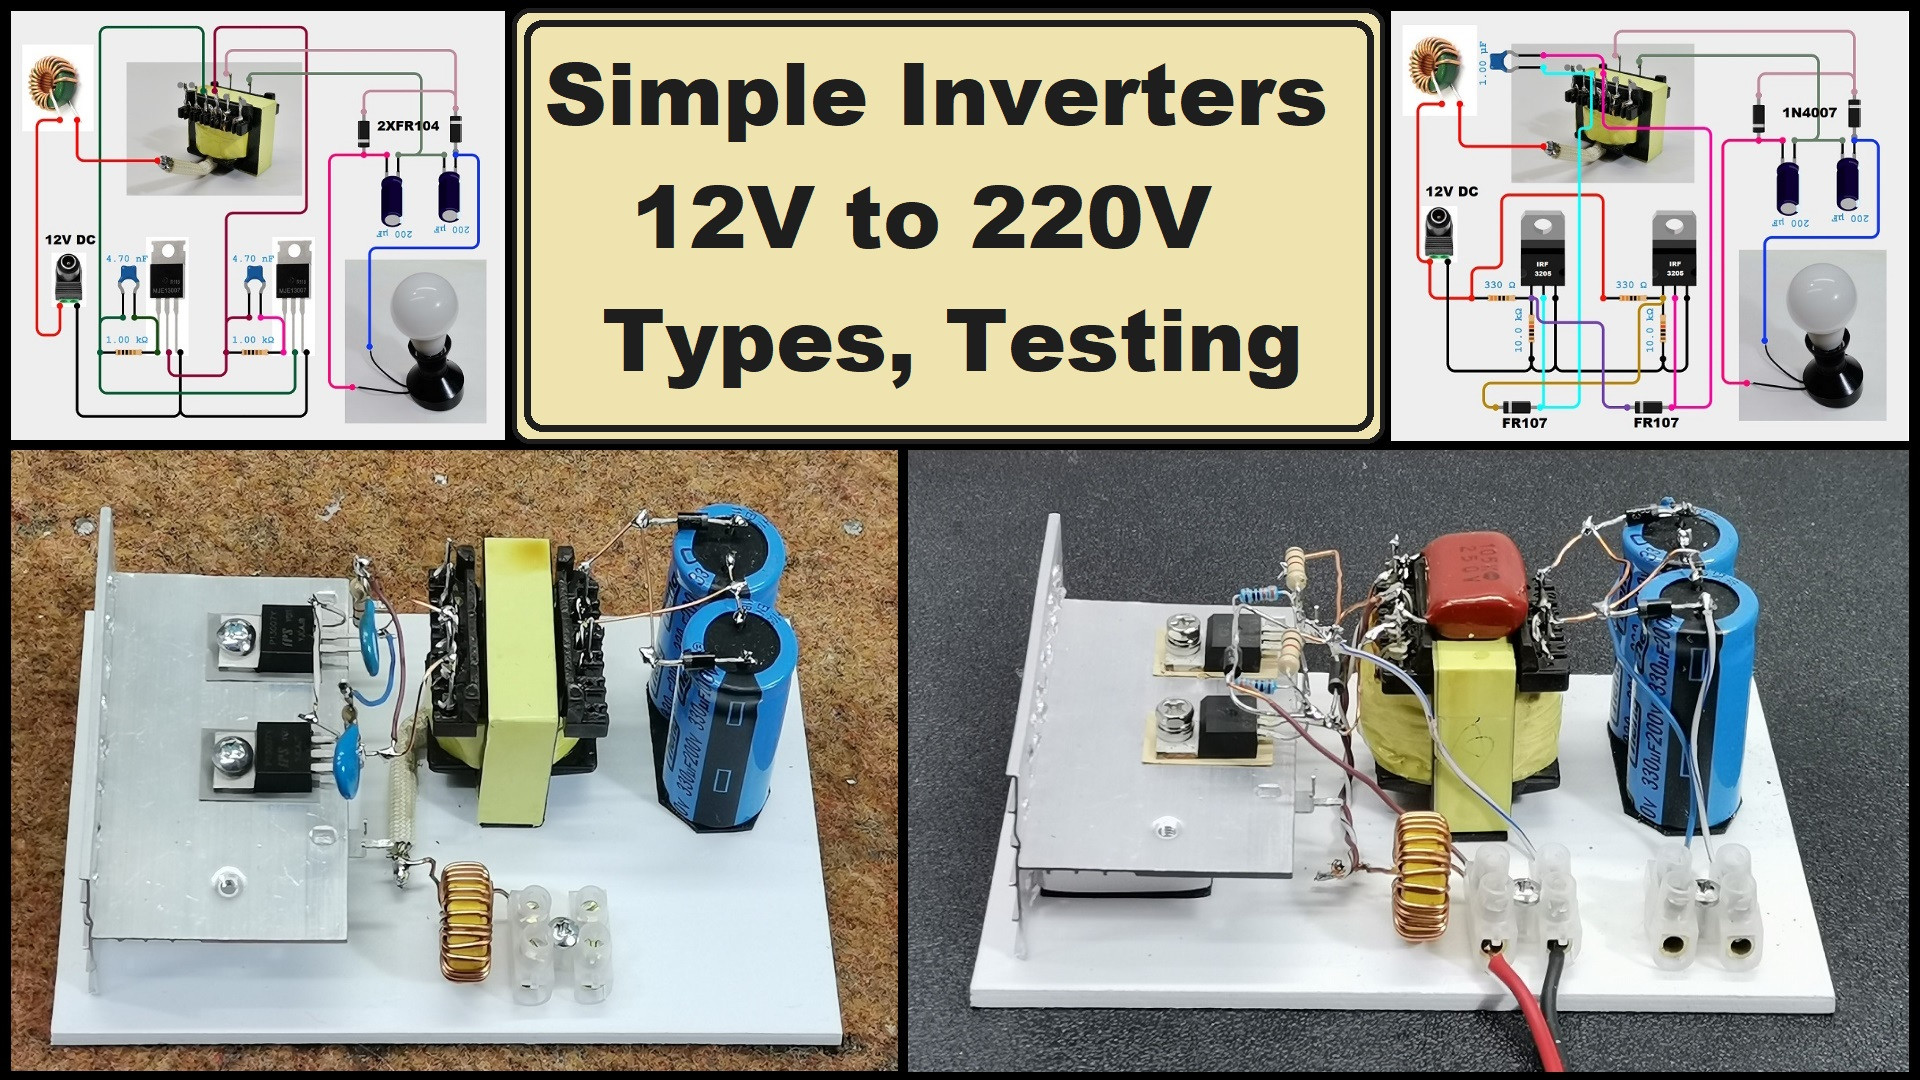 Simple Inverters 12V to 220V , comparision, testing, and real characteristics